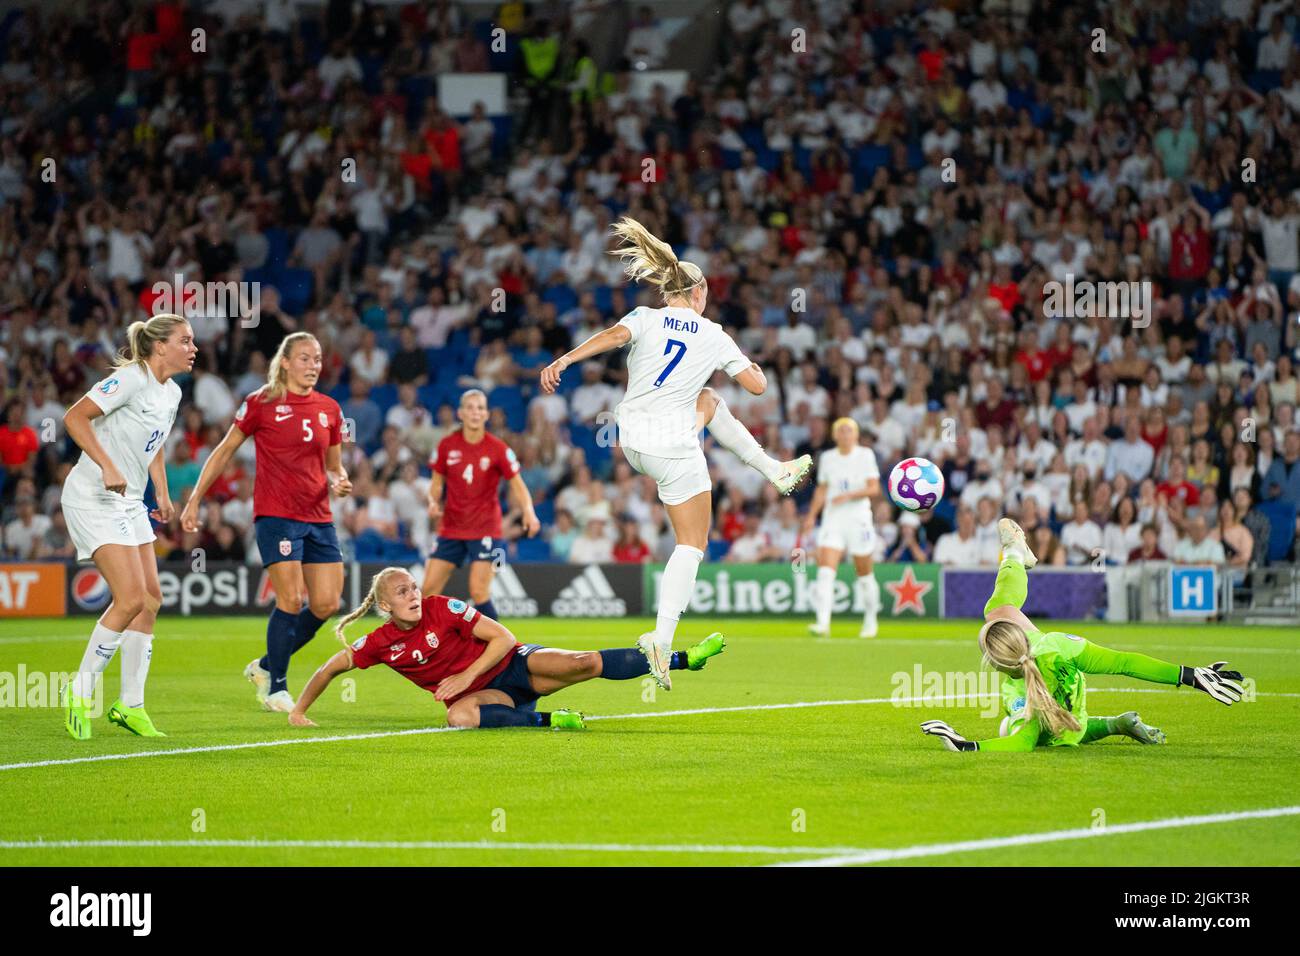 Brighton, UK. 11th July, 2022. Beth Mead (7 England) scores her hat trick and Englands eighth goal (8-0) during the UEFA Womens Euro 2022 football match between England and Norway at the Community Stadium in Brighton, England. (Foto: Sam Mallia/Sports Press Photo/C - ONE HOUR DEADLINE - ONLY ACTIVATE FTP IF IMAGES LESS THAN ONE HOUR OLD - Alamy) Credit: SPP Sport Press Photo. /Alamy Live News Stock Photo